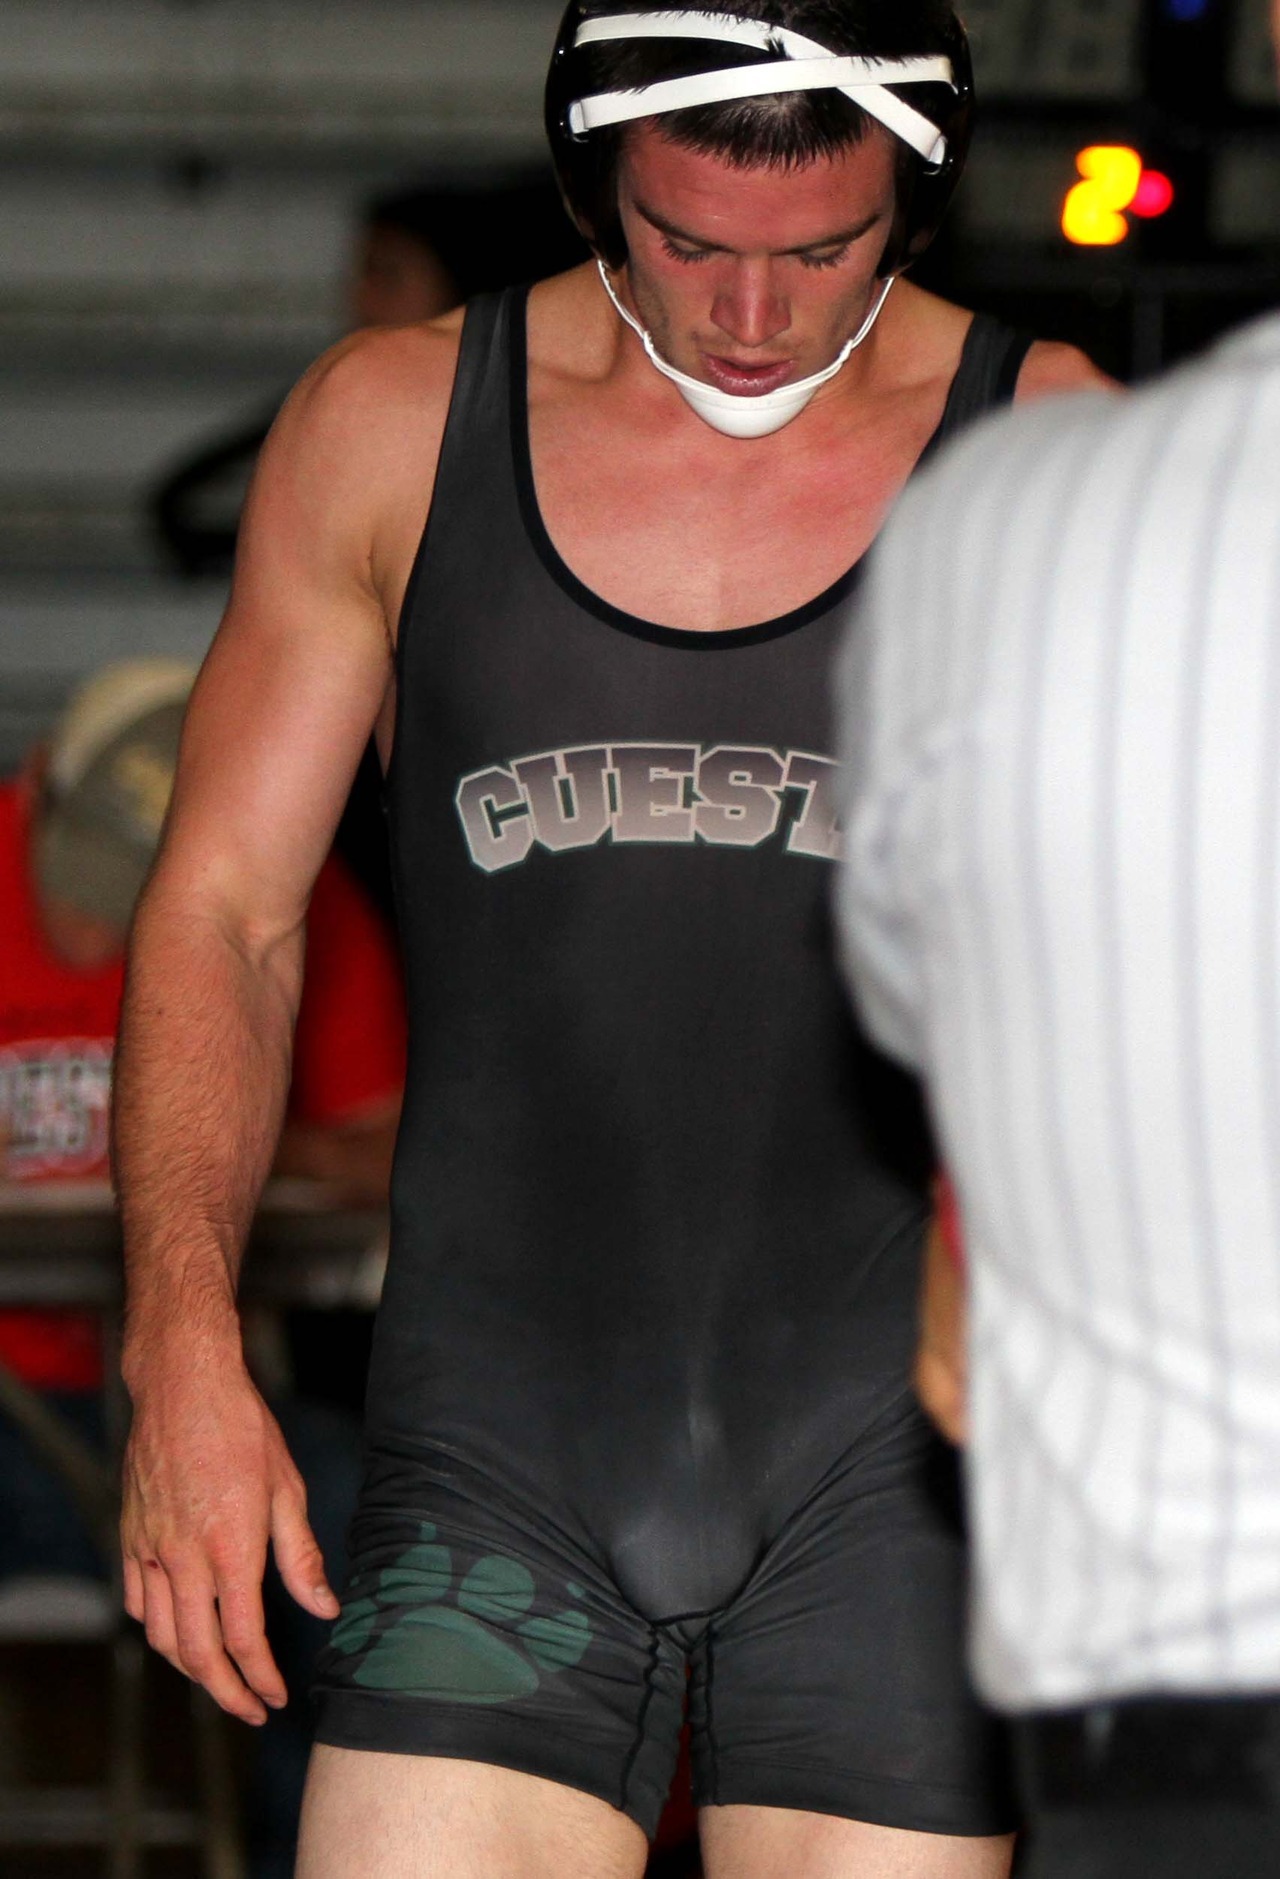 Follow me for Hot Wrestlers in Sexy Singlets =)